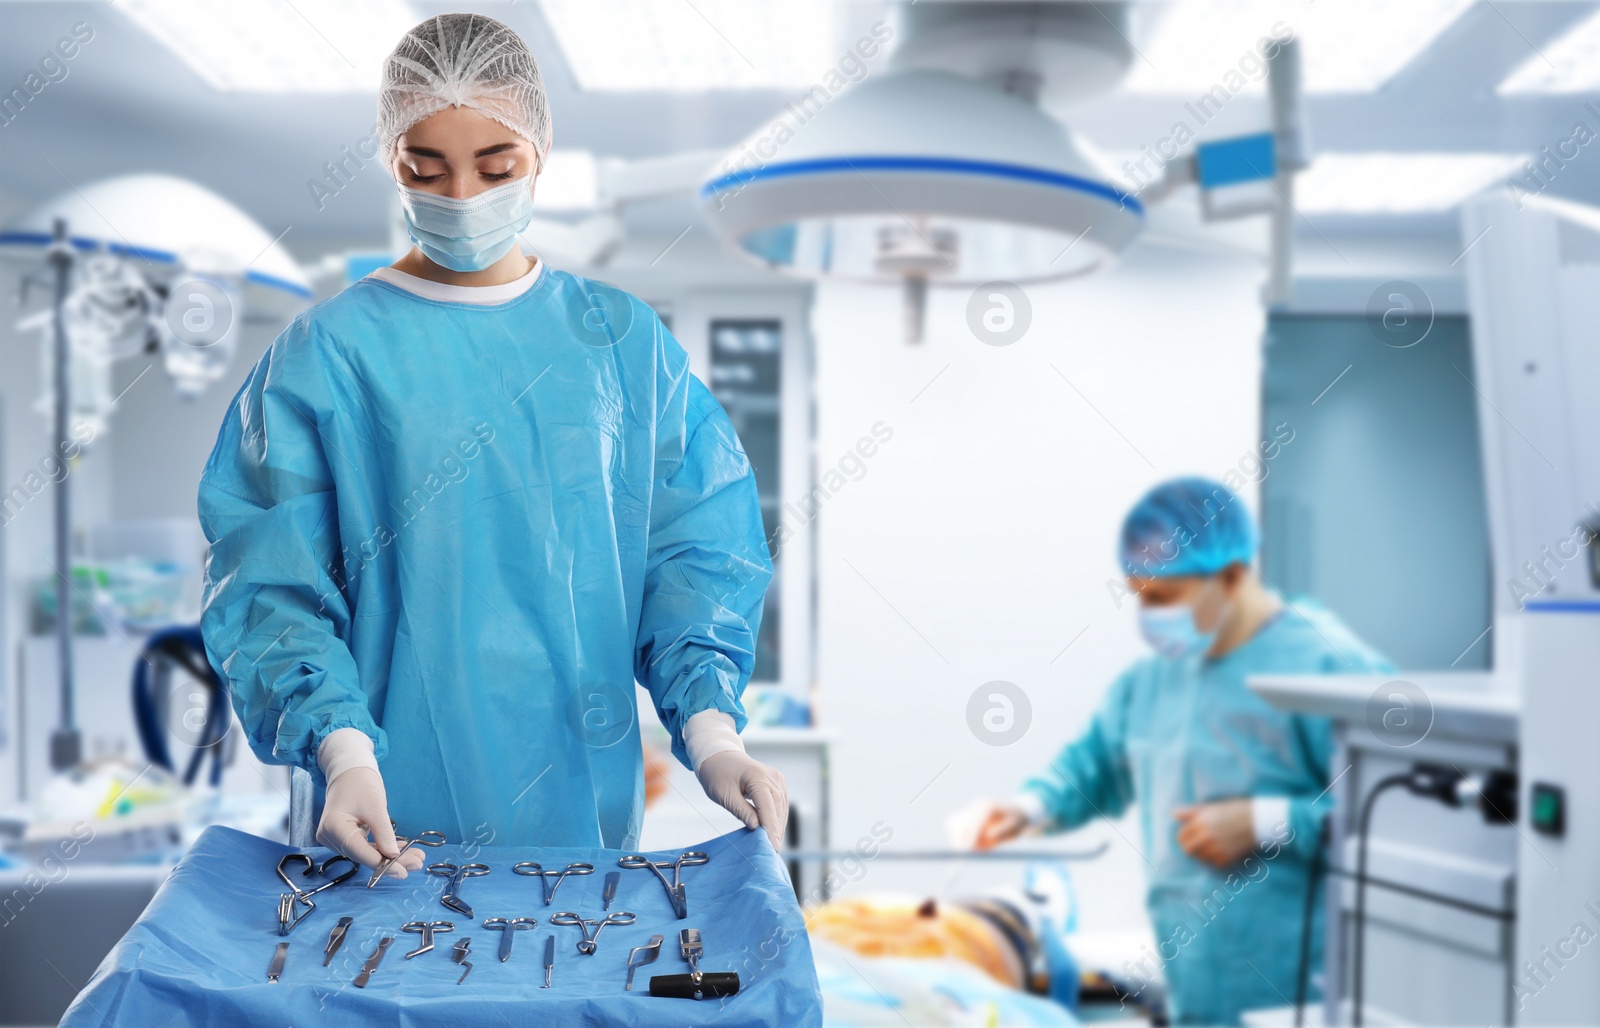 Image of Nurse near table with different surgical instruments in operating room